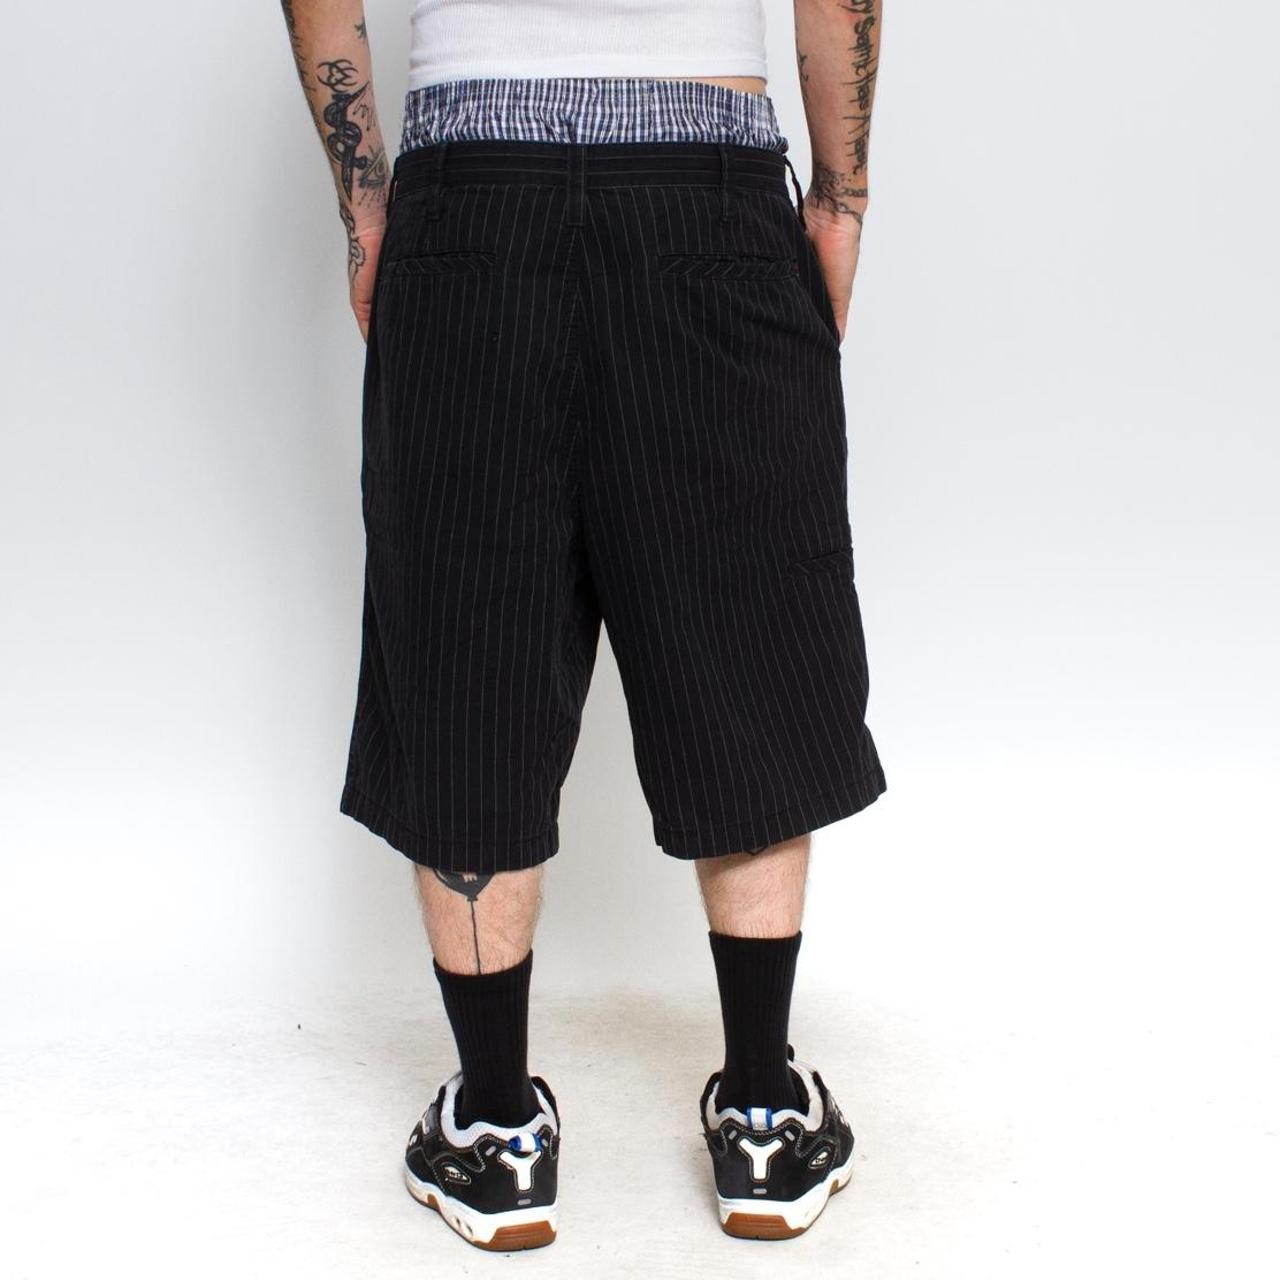 Hawke & Co. Men's Black and White Shorts (3)